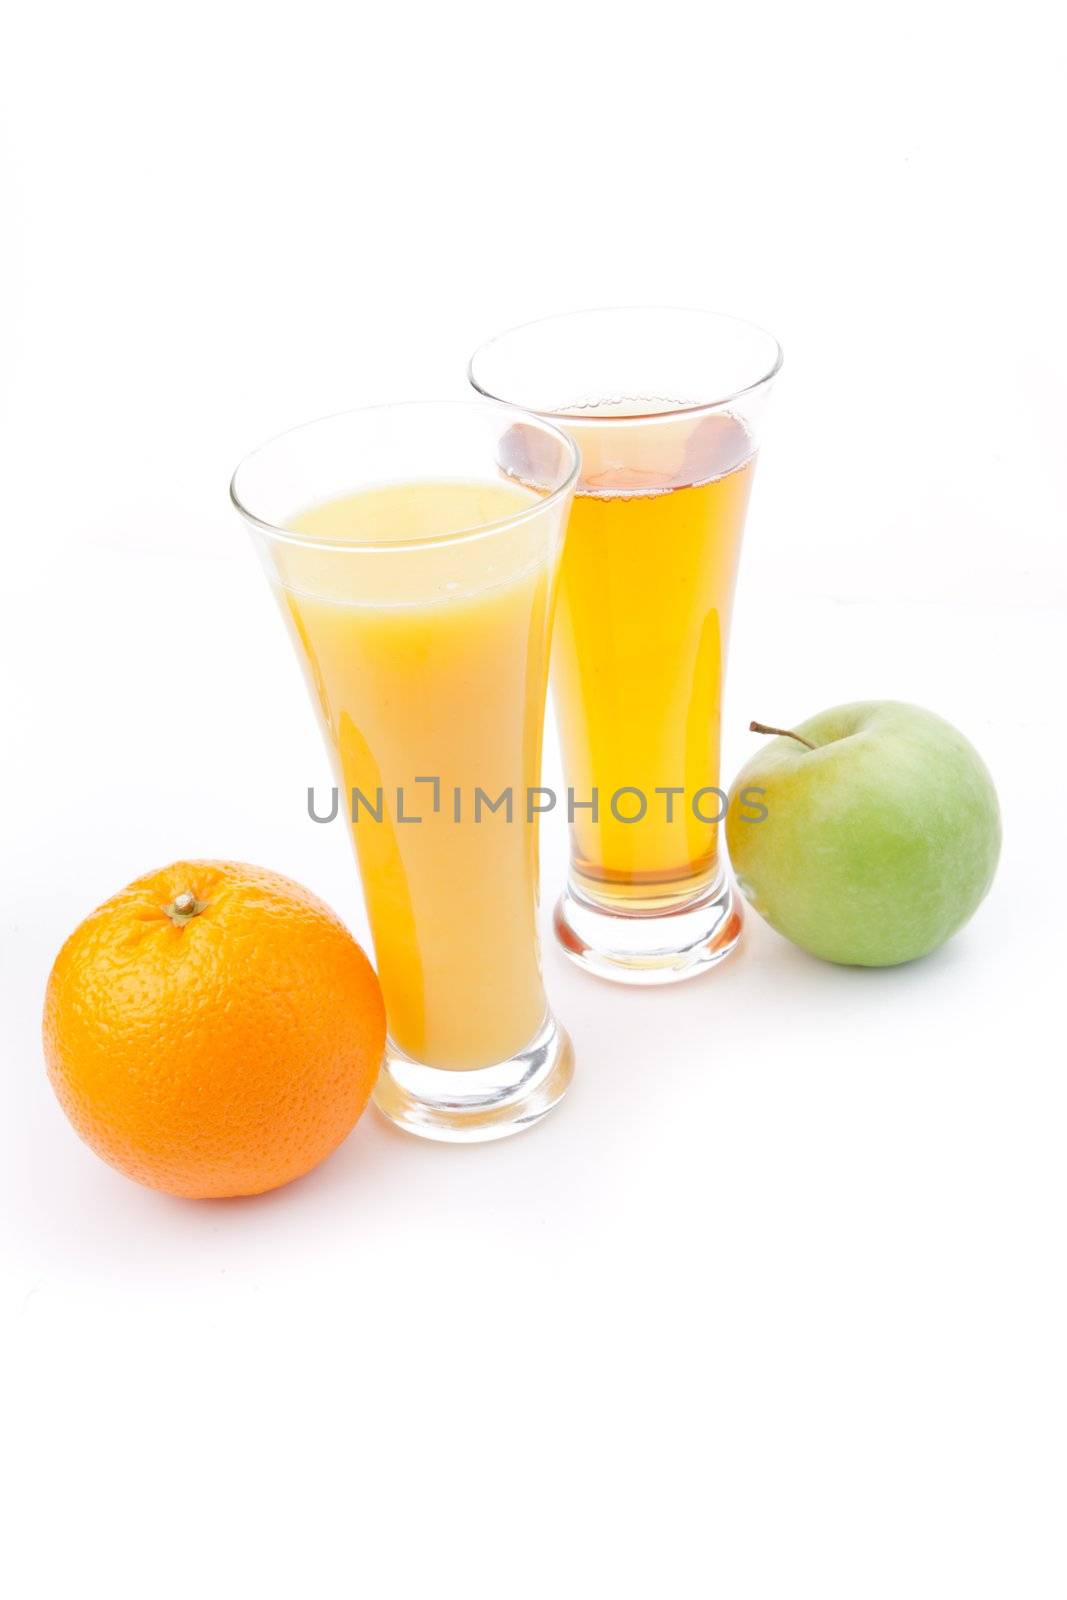 Glass of orange juice near a glass of apple juice against white background